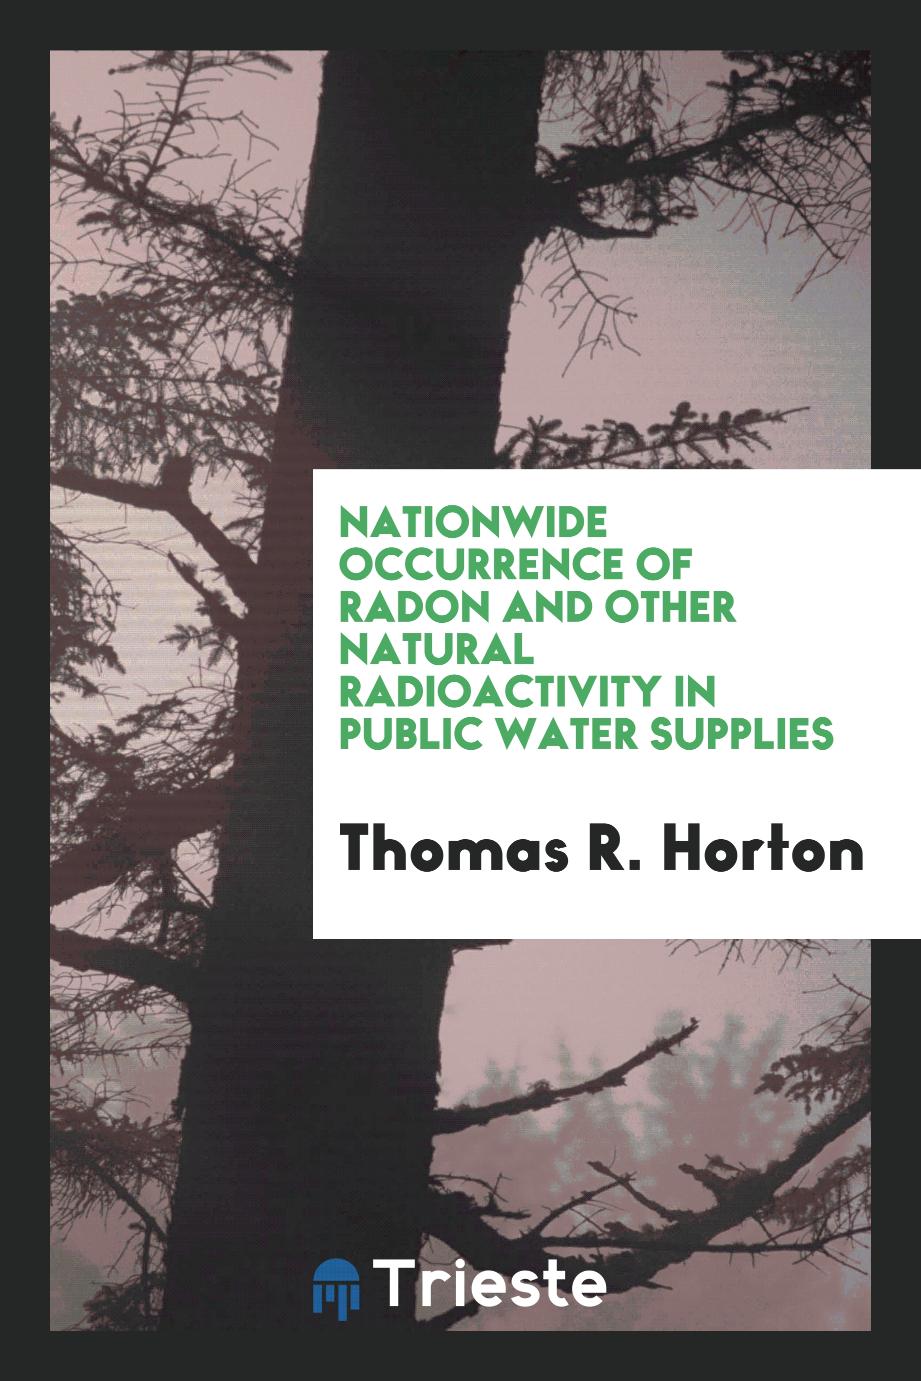 Nationwide occurrence of radon and other natural radioactivity in public water supplies